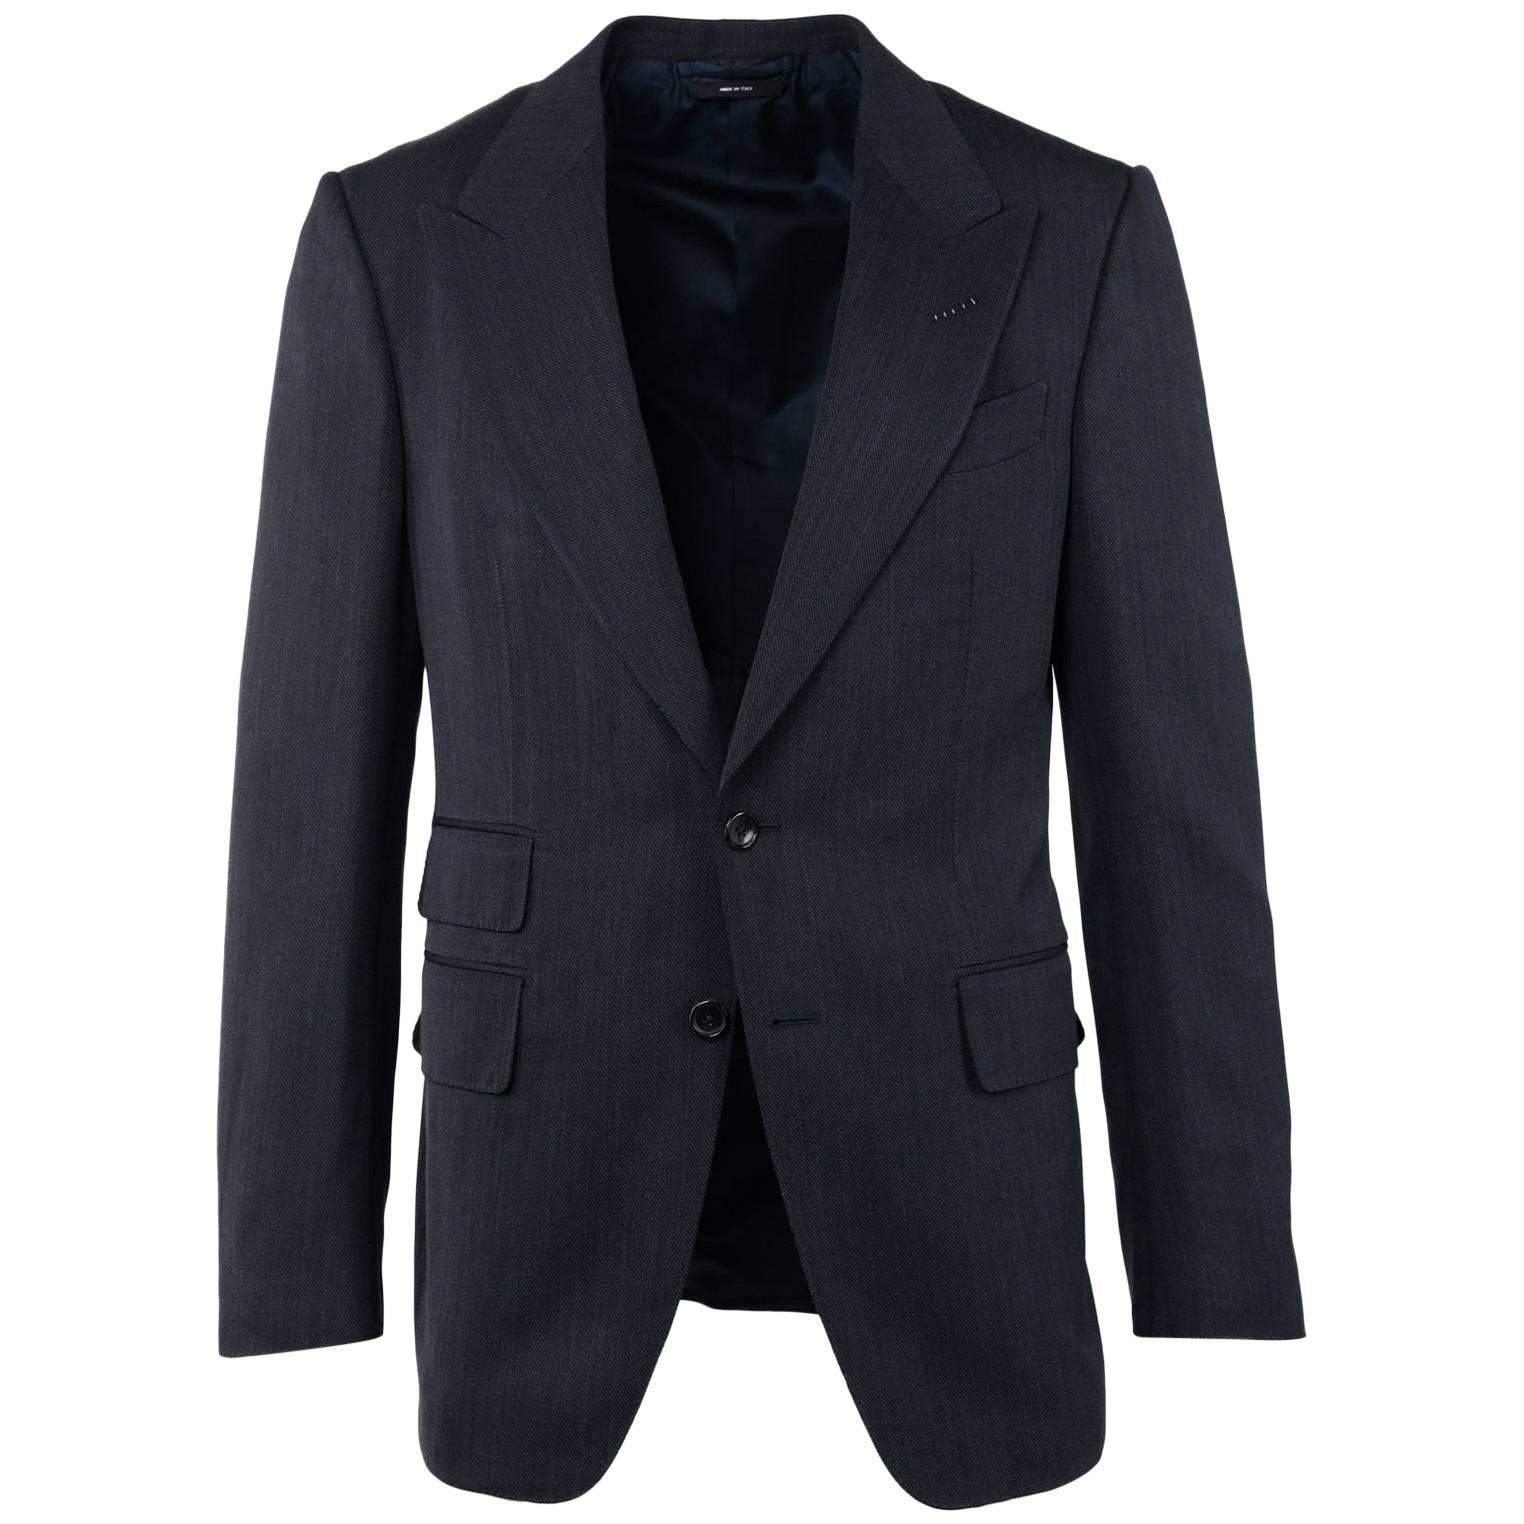  Tom Ford Grey Wool Micro Striped Baste Shelton Two Piece Suit  For Sale